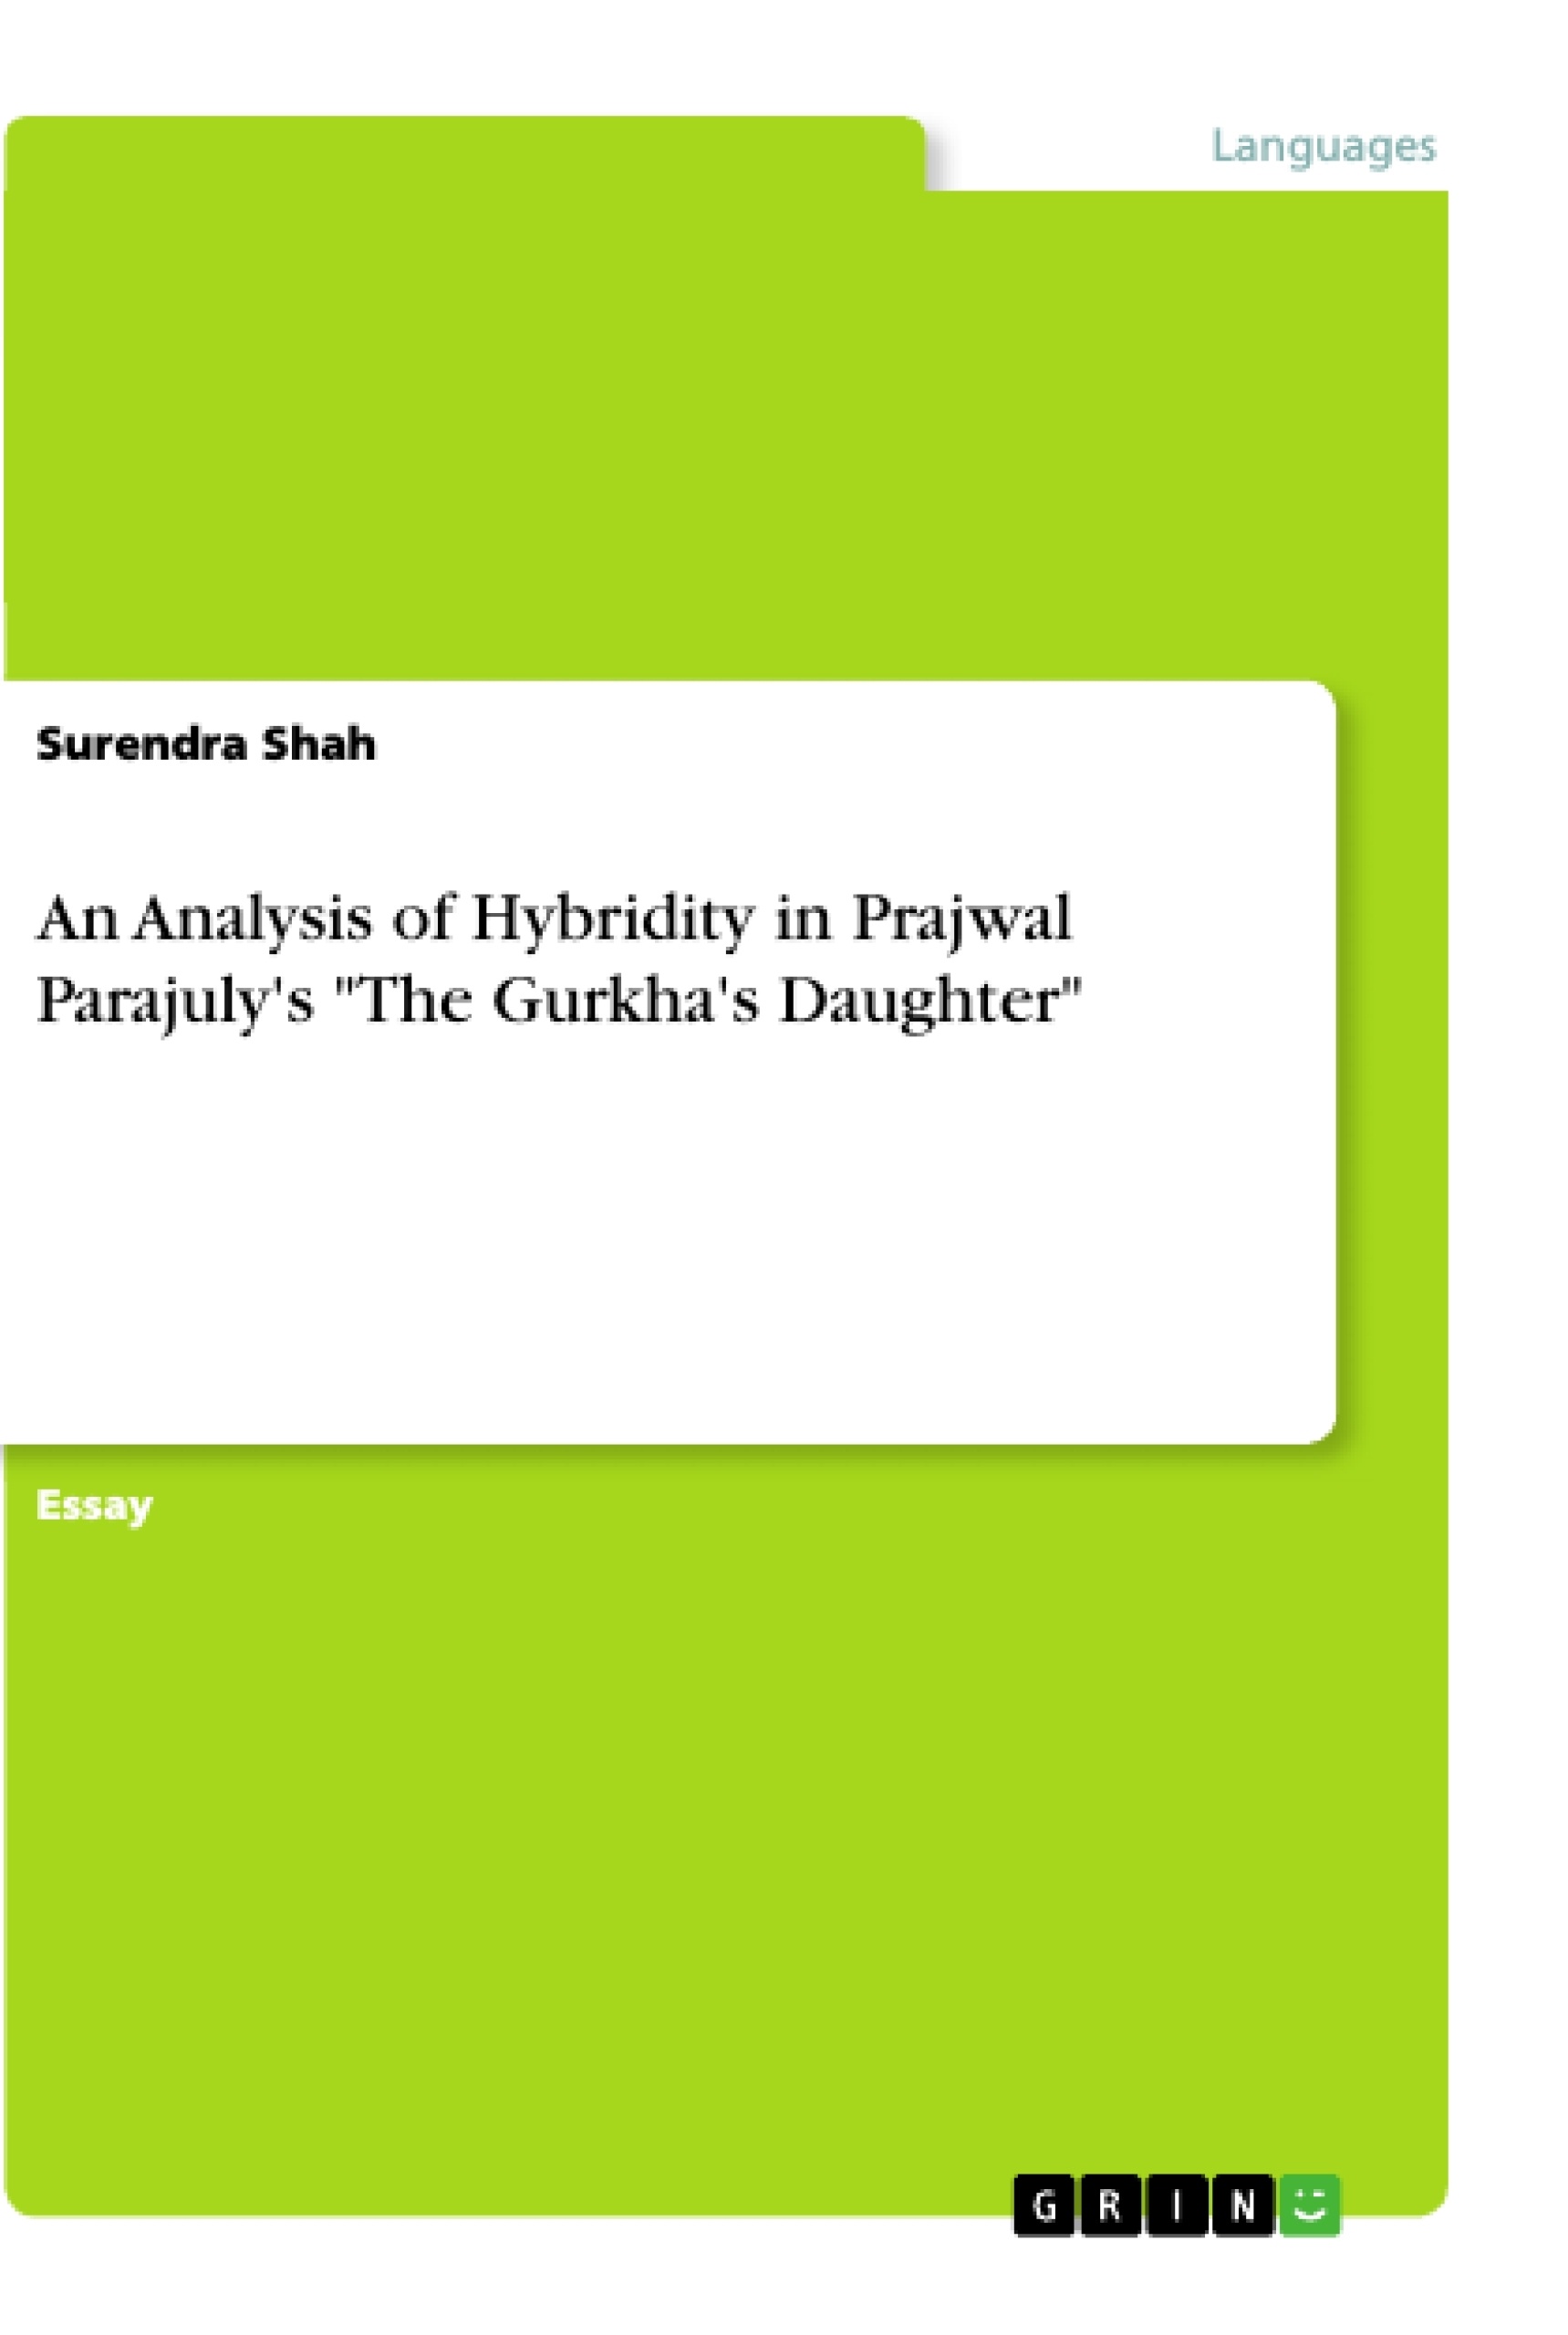 Title: An Analysis of Hybridity in Prajwal Parajuly's "The Gurkha's Daughter"